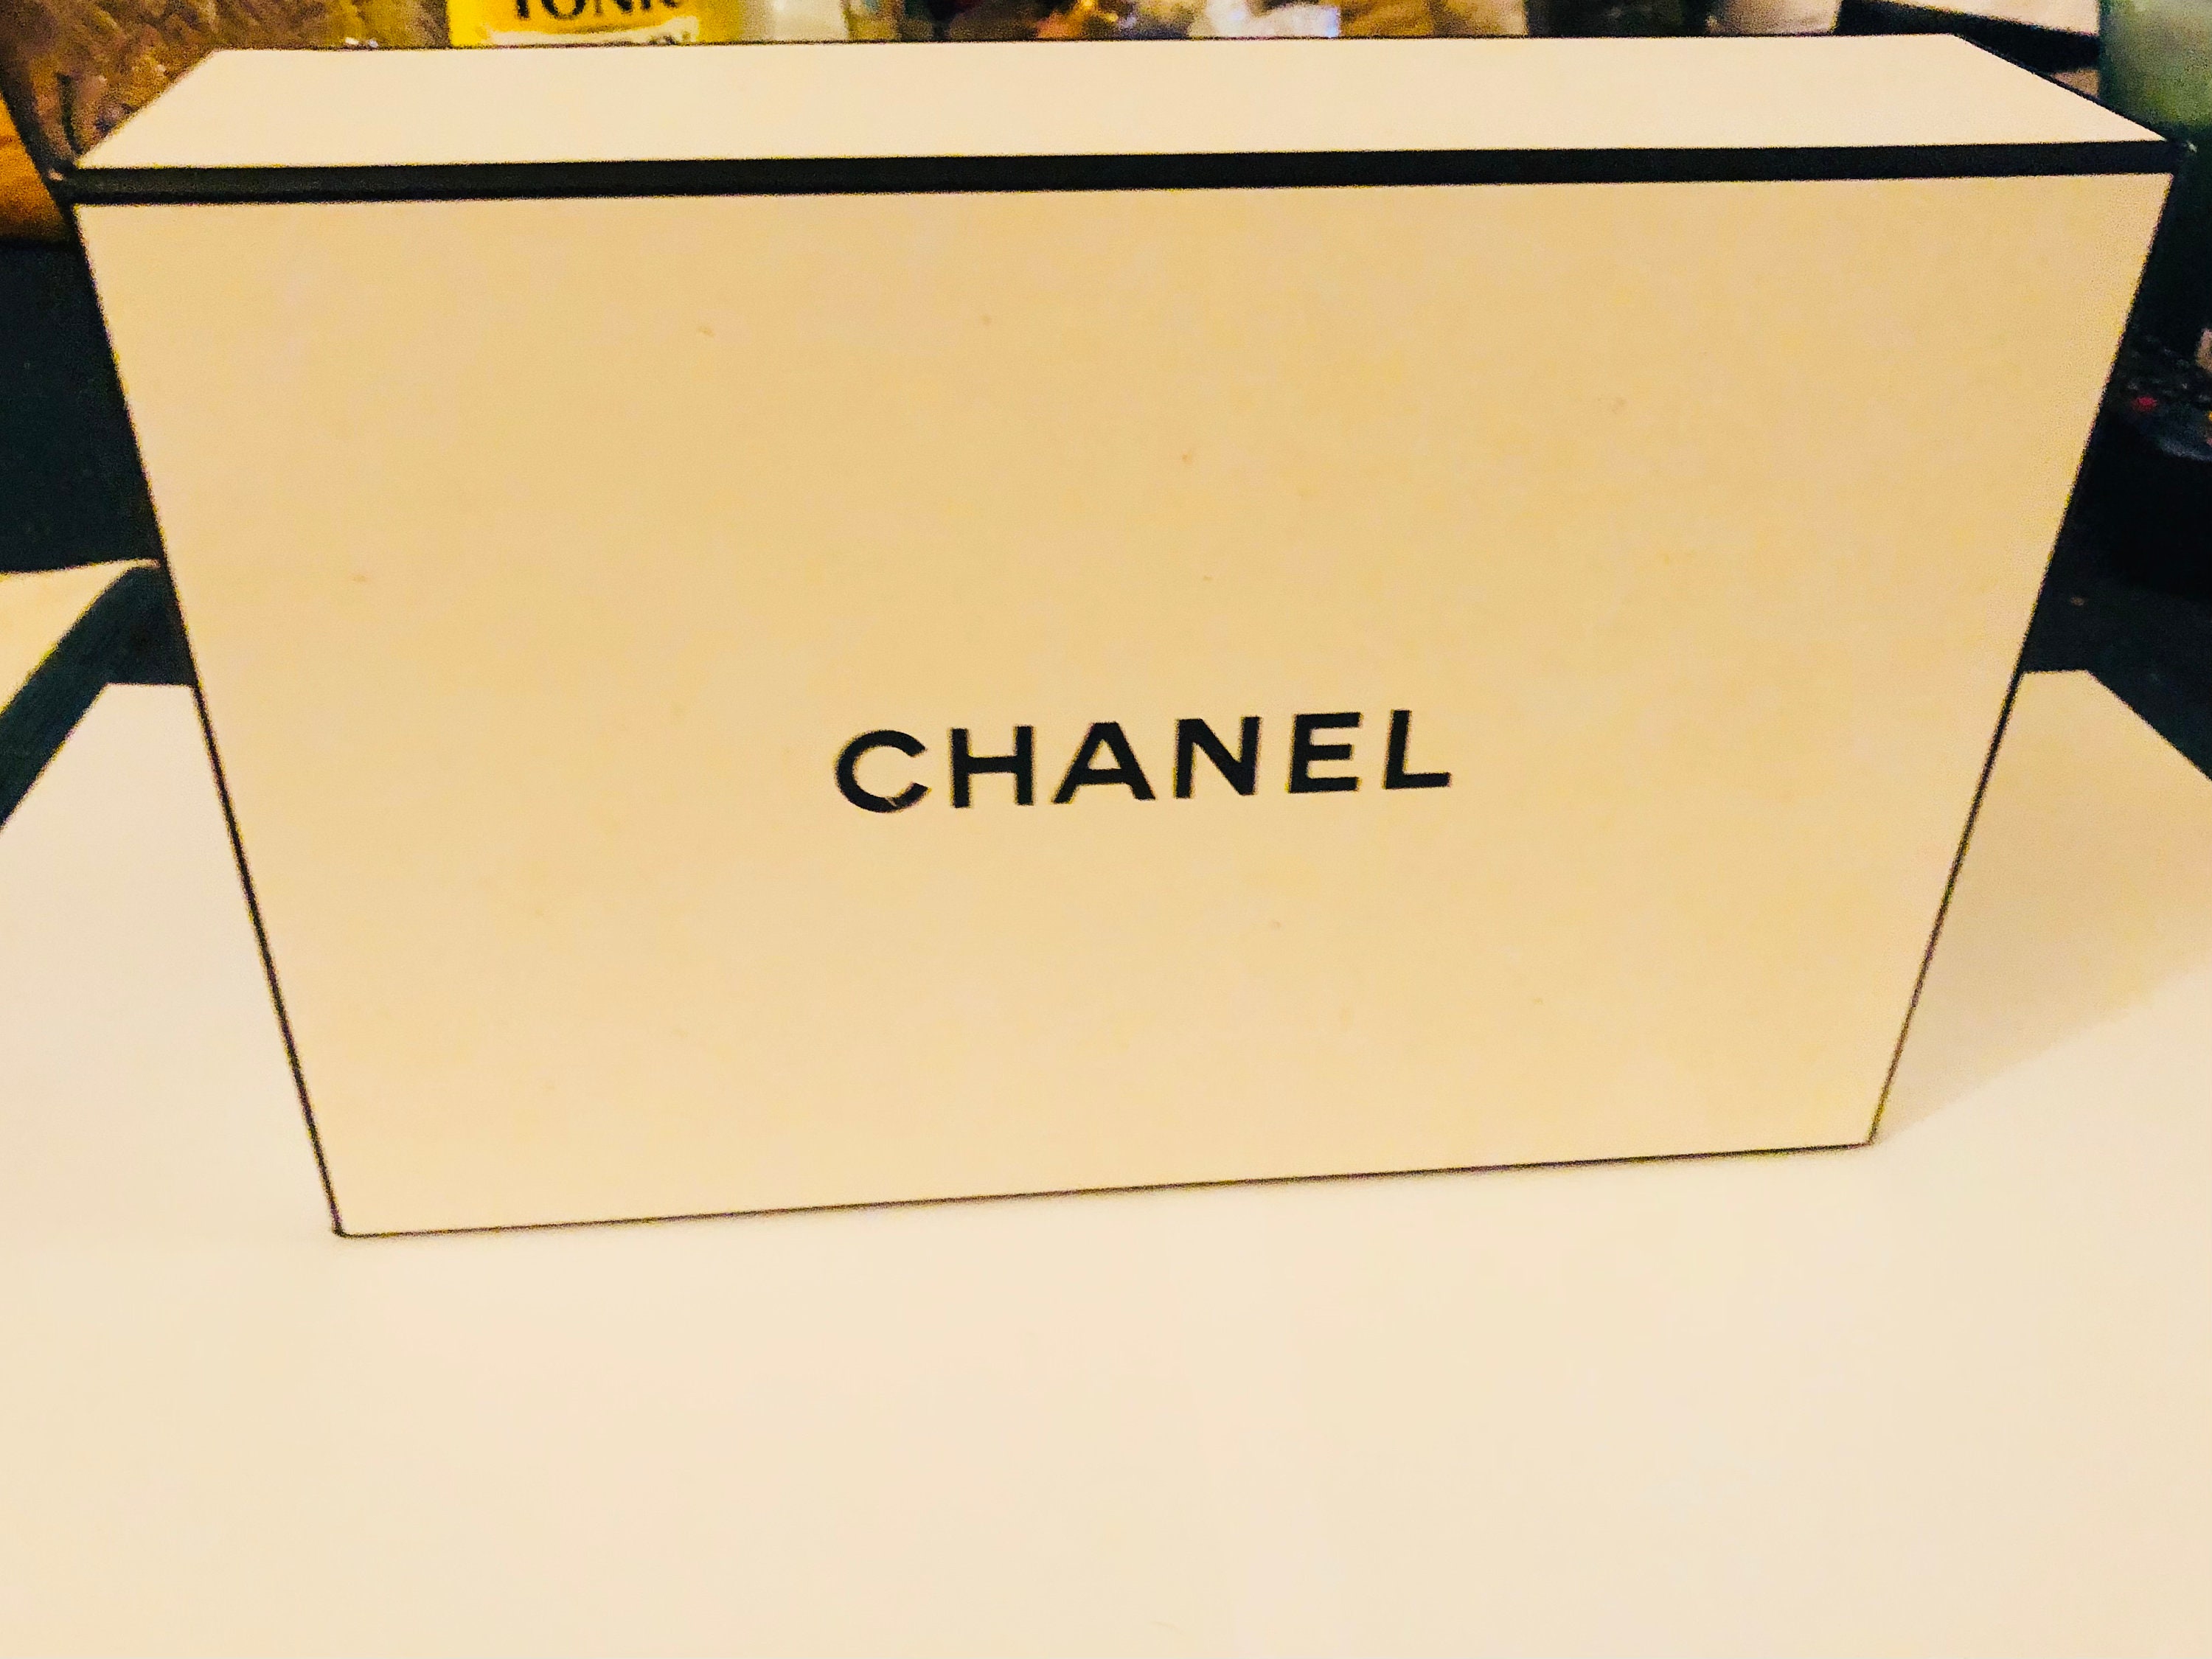 CHANEL Gift Box - Medium 8.5 x 8.5 x 3.5 with tissue ~ gift bag ~ filler  paper!